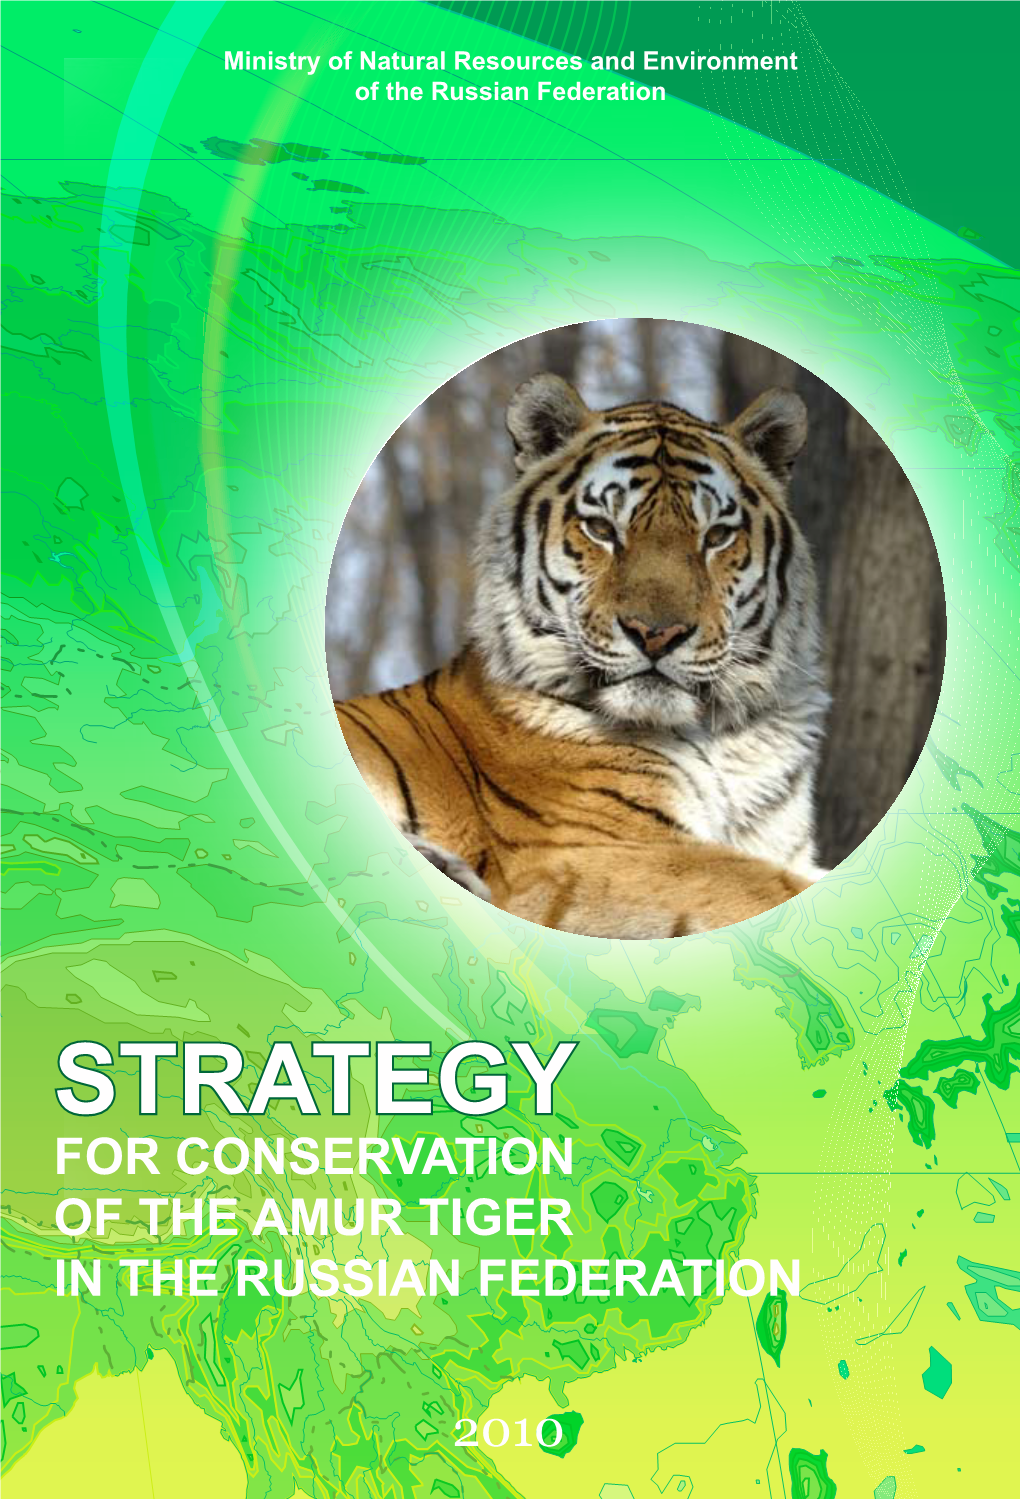 STRATEGY M for CONSERVATION a of the AMUR TIGER in the RUSSIAN FEDERATION